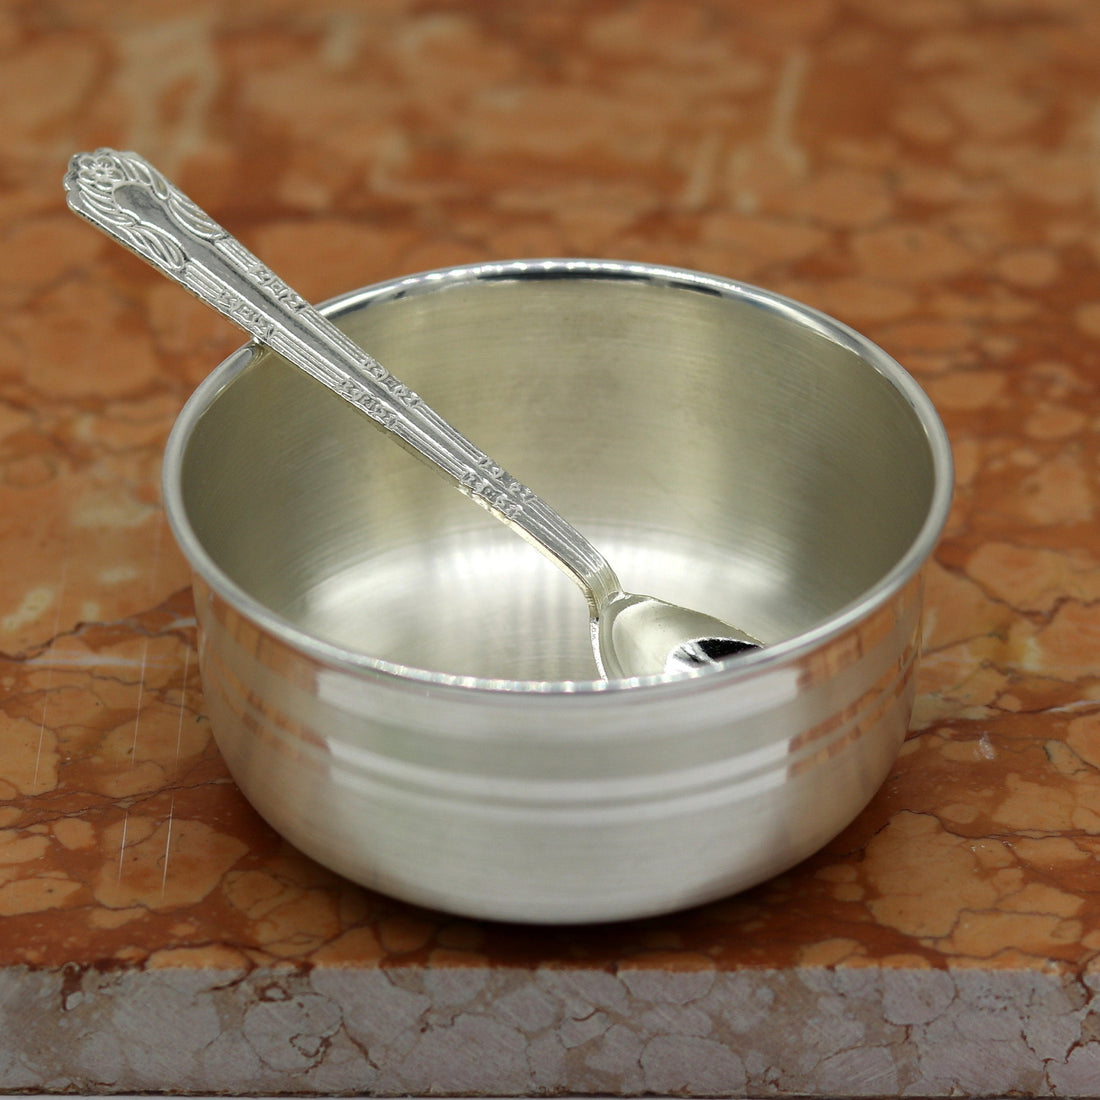 999 pure sterling silver handmade solid silver bowl and spoon, silver has antibacterial properties, stay healthy, silver vessels sv67 - TRIBAL ORNAMENTS